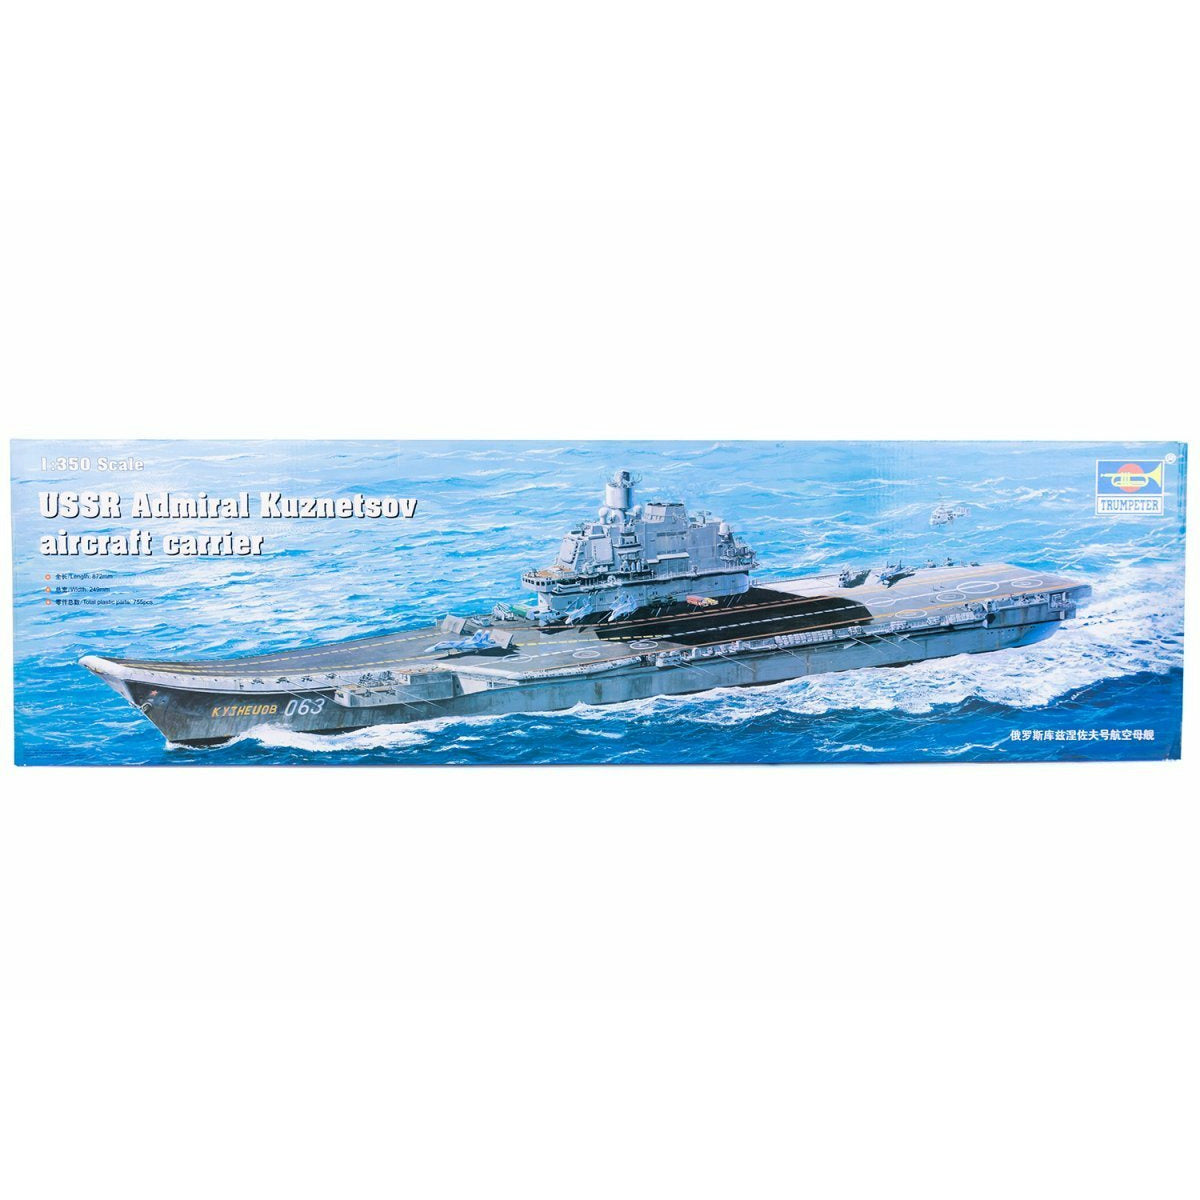 USSR Admiral Kuznetsov Aircraft Carrier 1/350 Model Ship Kit #5606 by Trumpeter